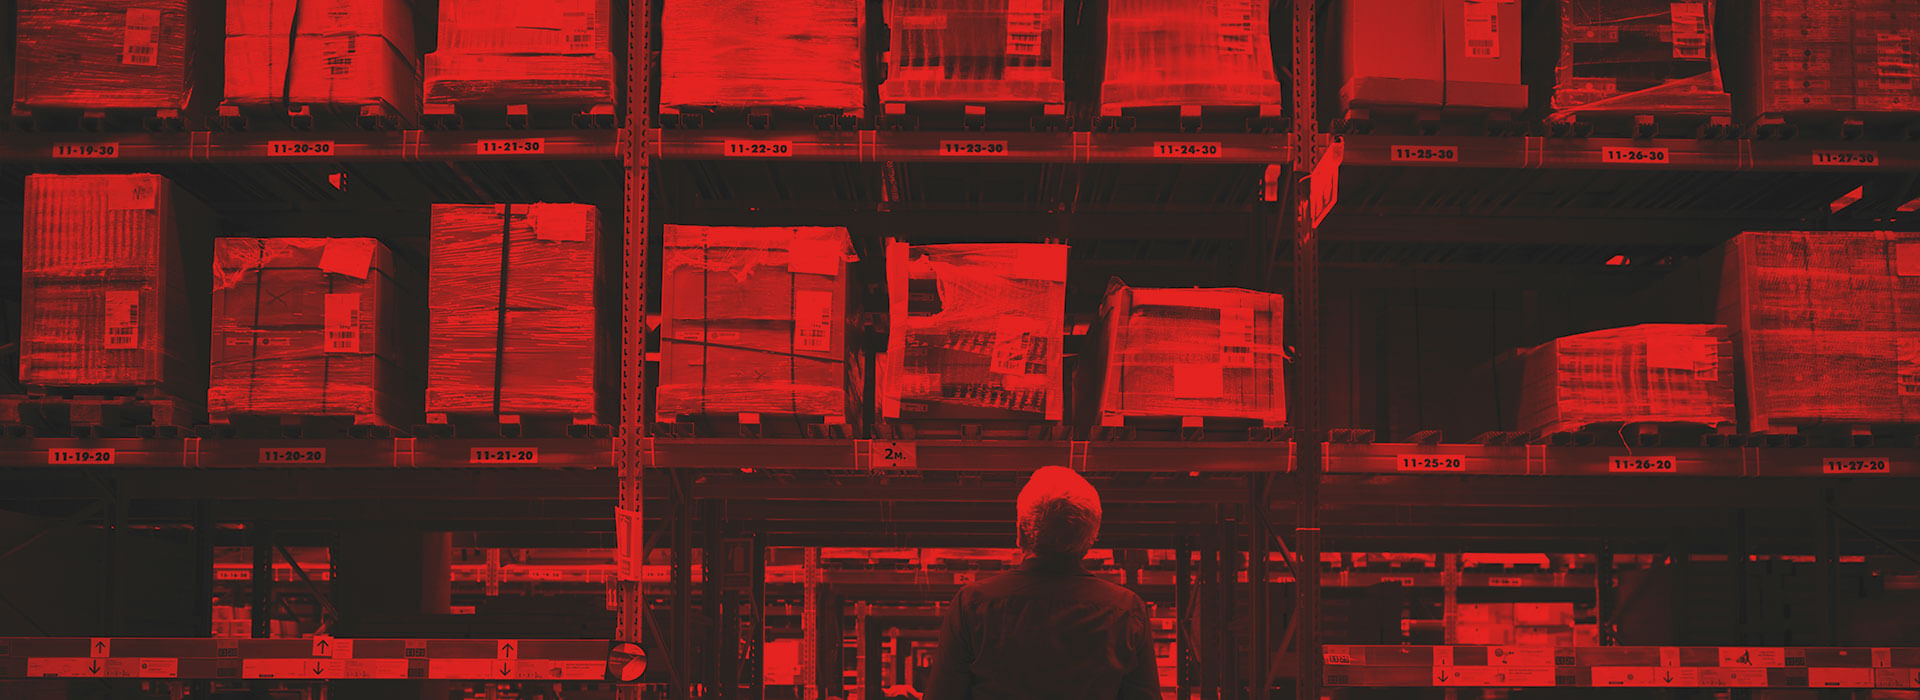 The 7 deadly sins of physical inventory counting